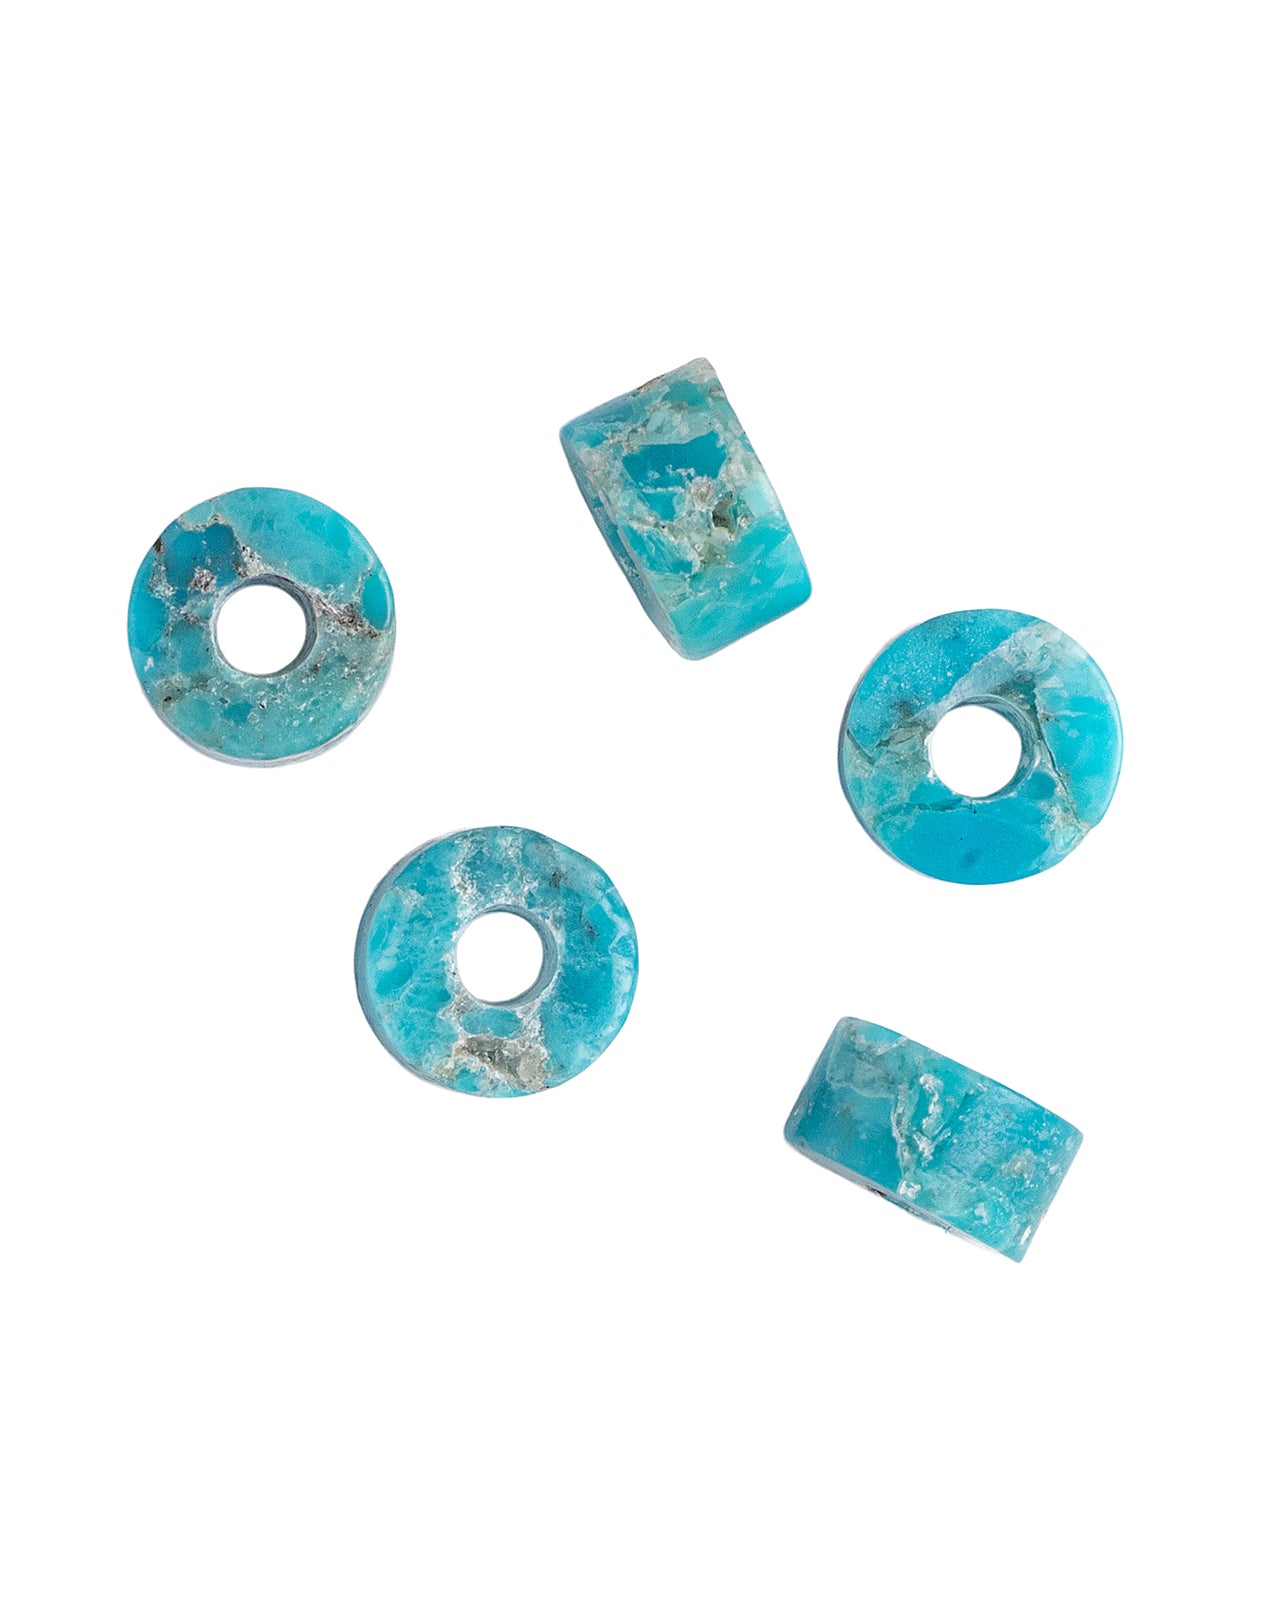 Larry Smith Turquoise Bead, Small, Set of 2